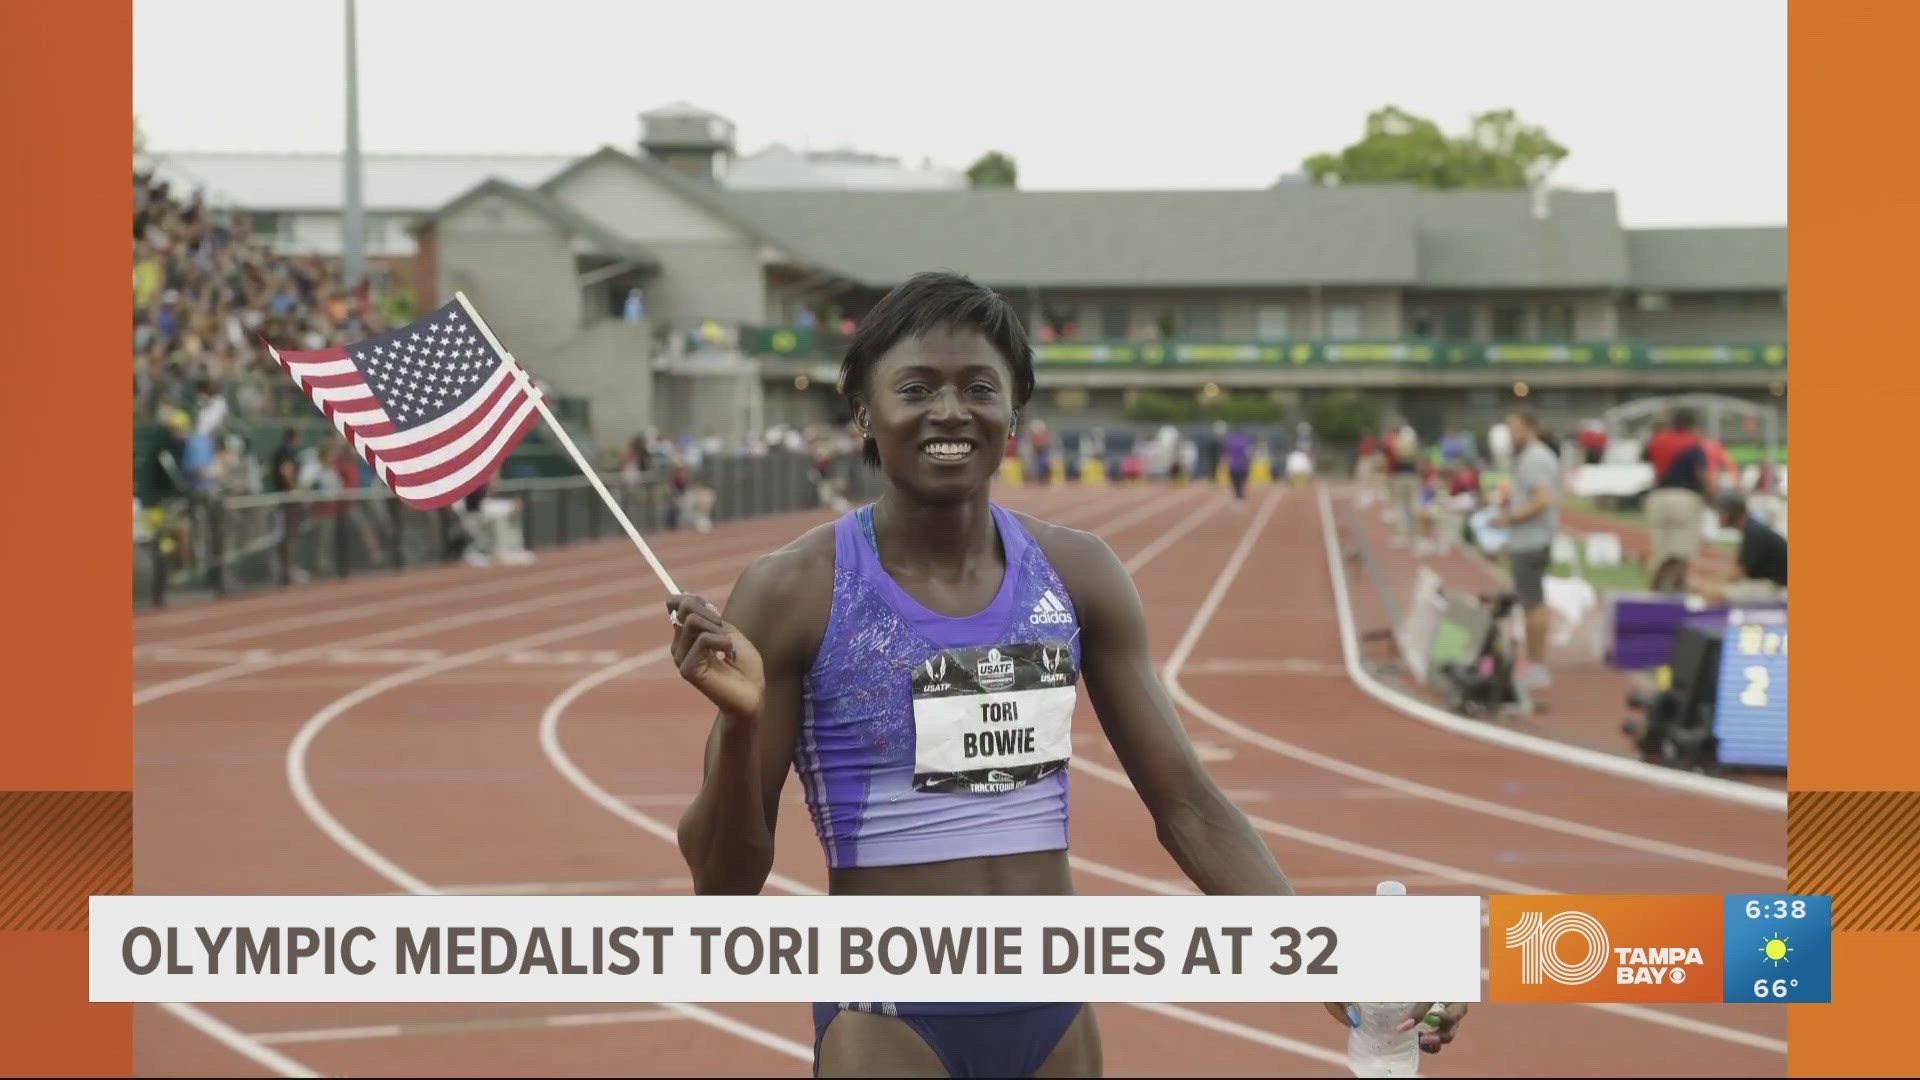 Bowie turned in an electric performance at the 2016 Rio Olympics, winning a gold, silver and bronze medal.